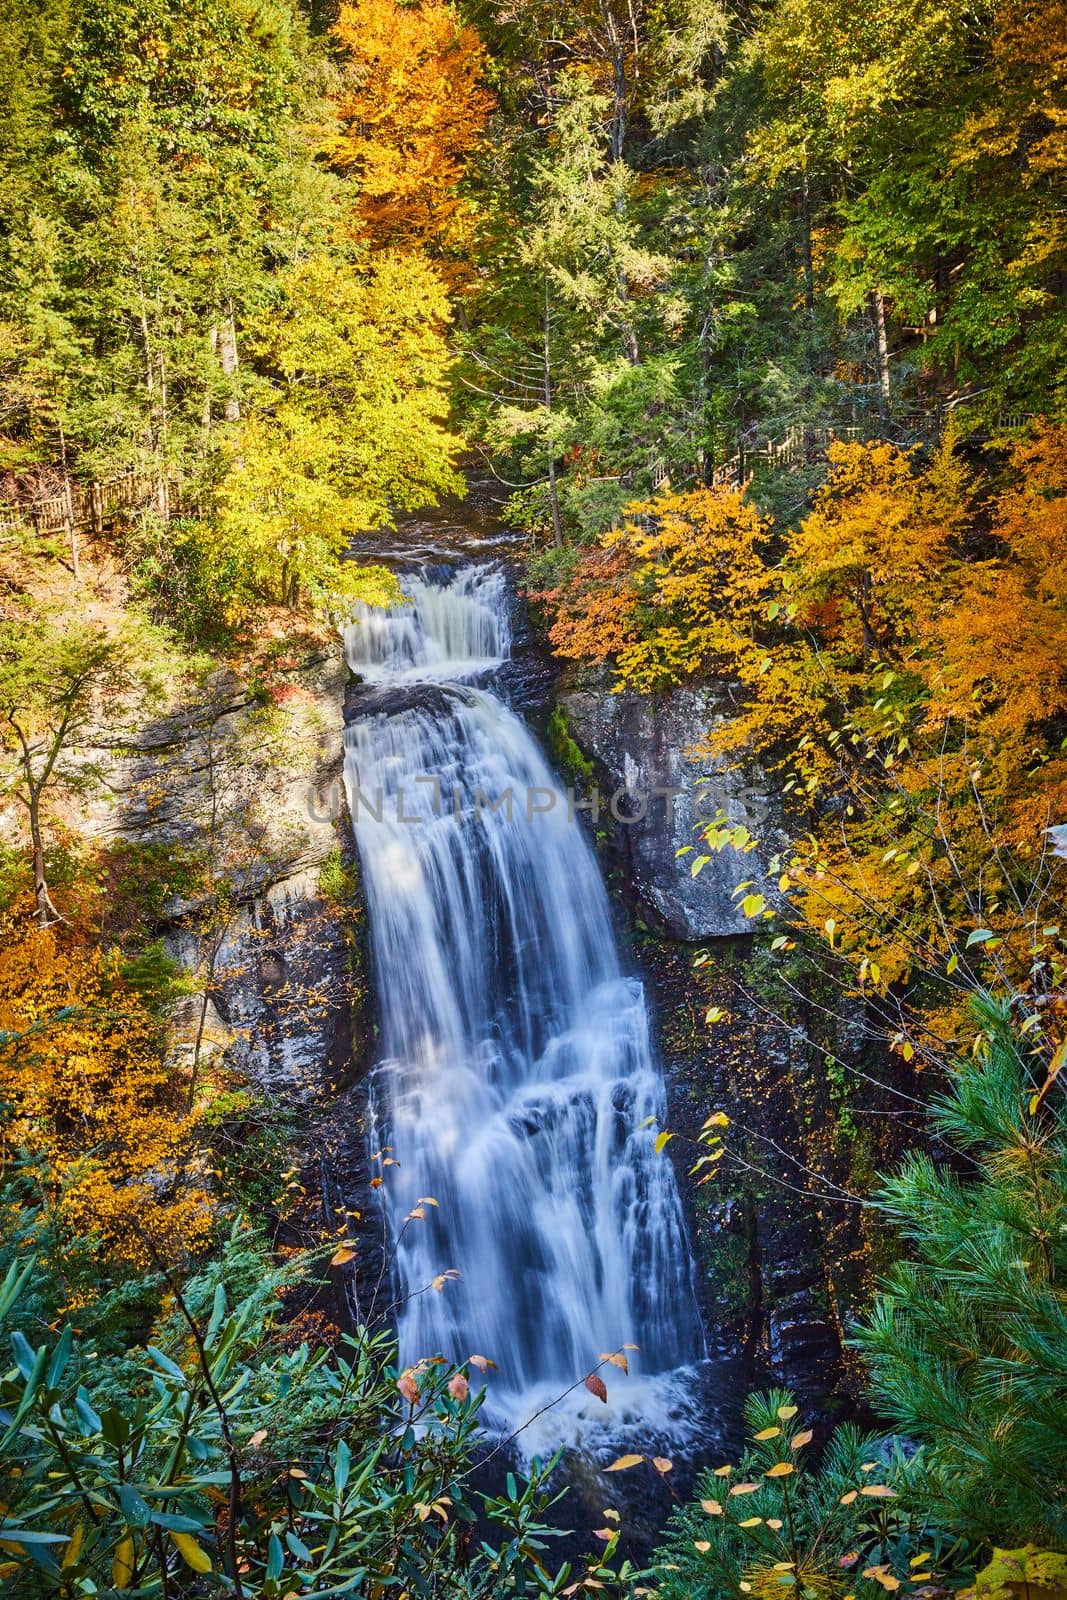 Image of Large waterfall over cliffs surrounded by fall foliage trees